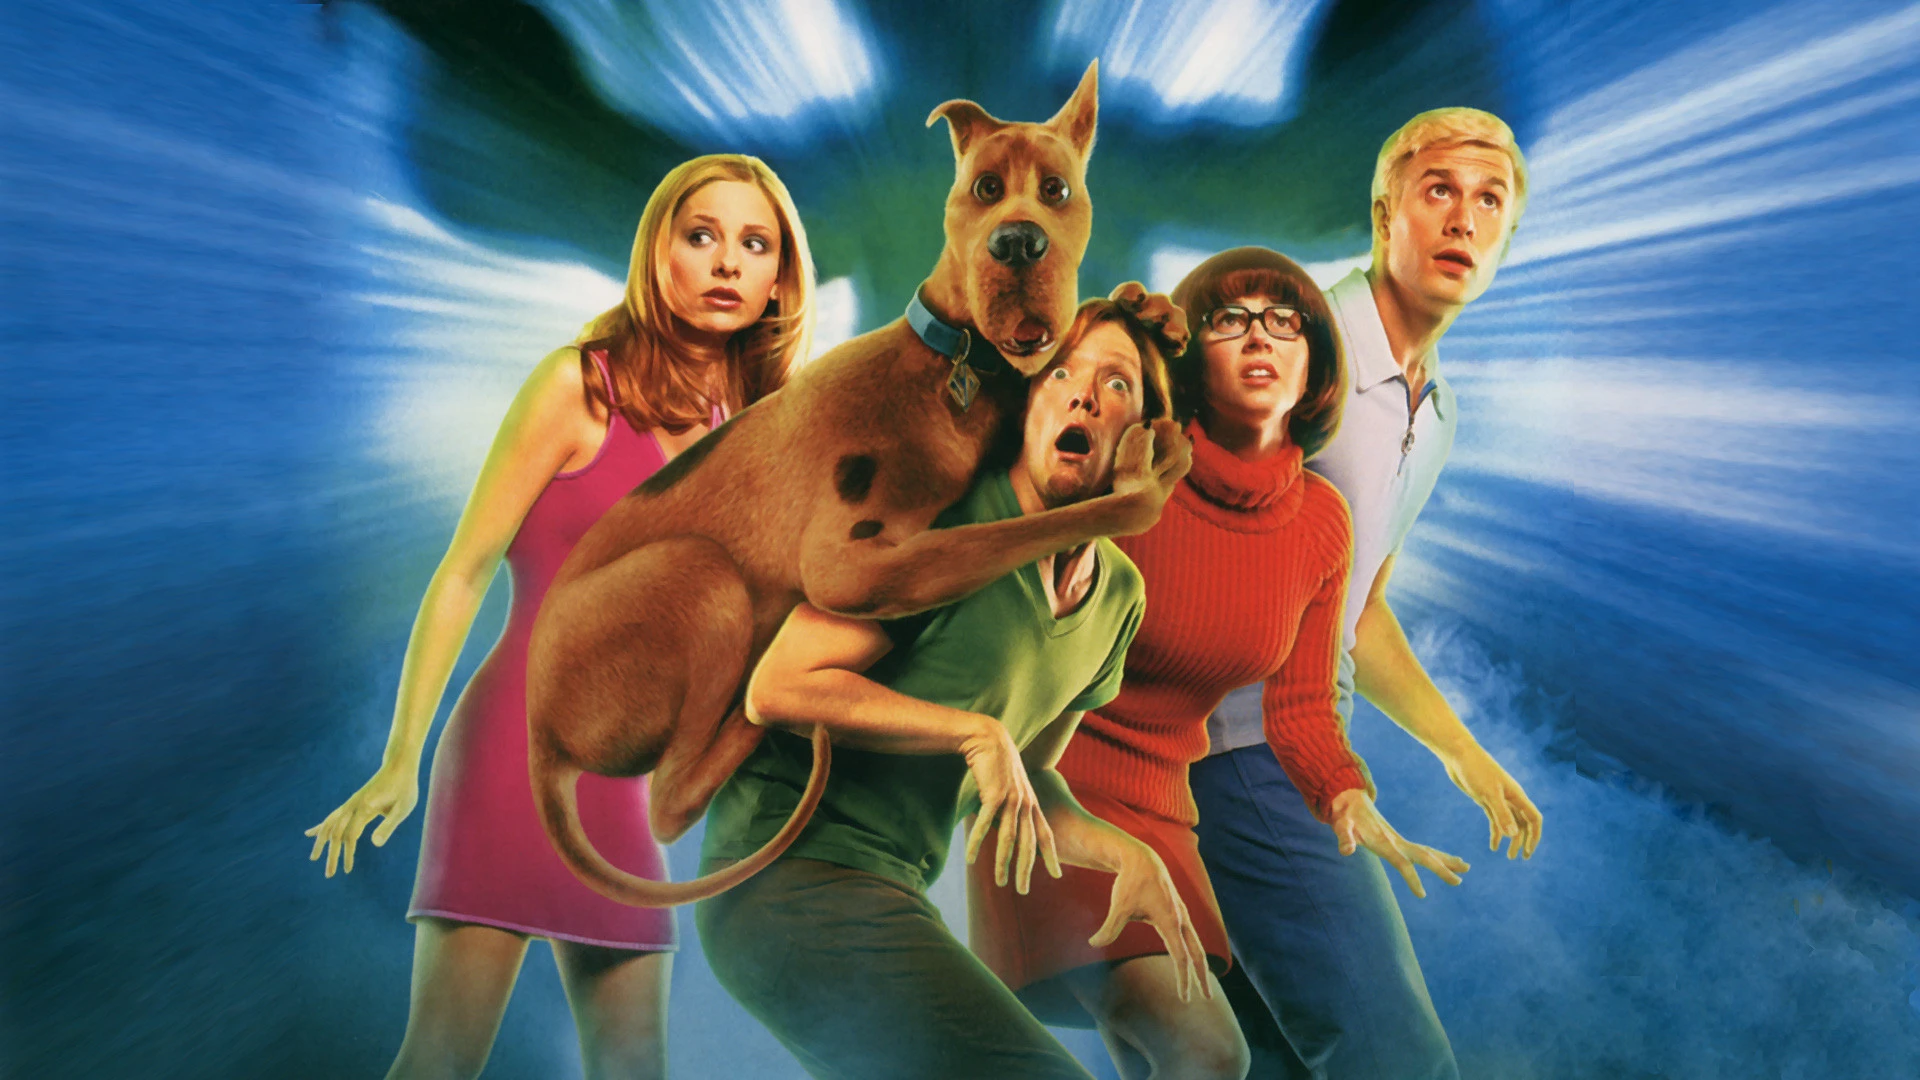 ‘Scooby-Doo’ Live-Action Series In The Works At Netflix